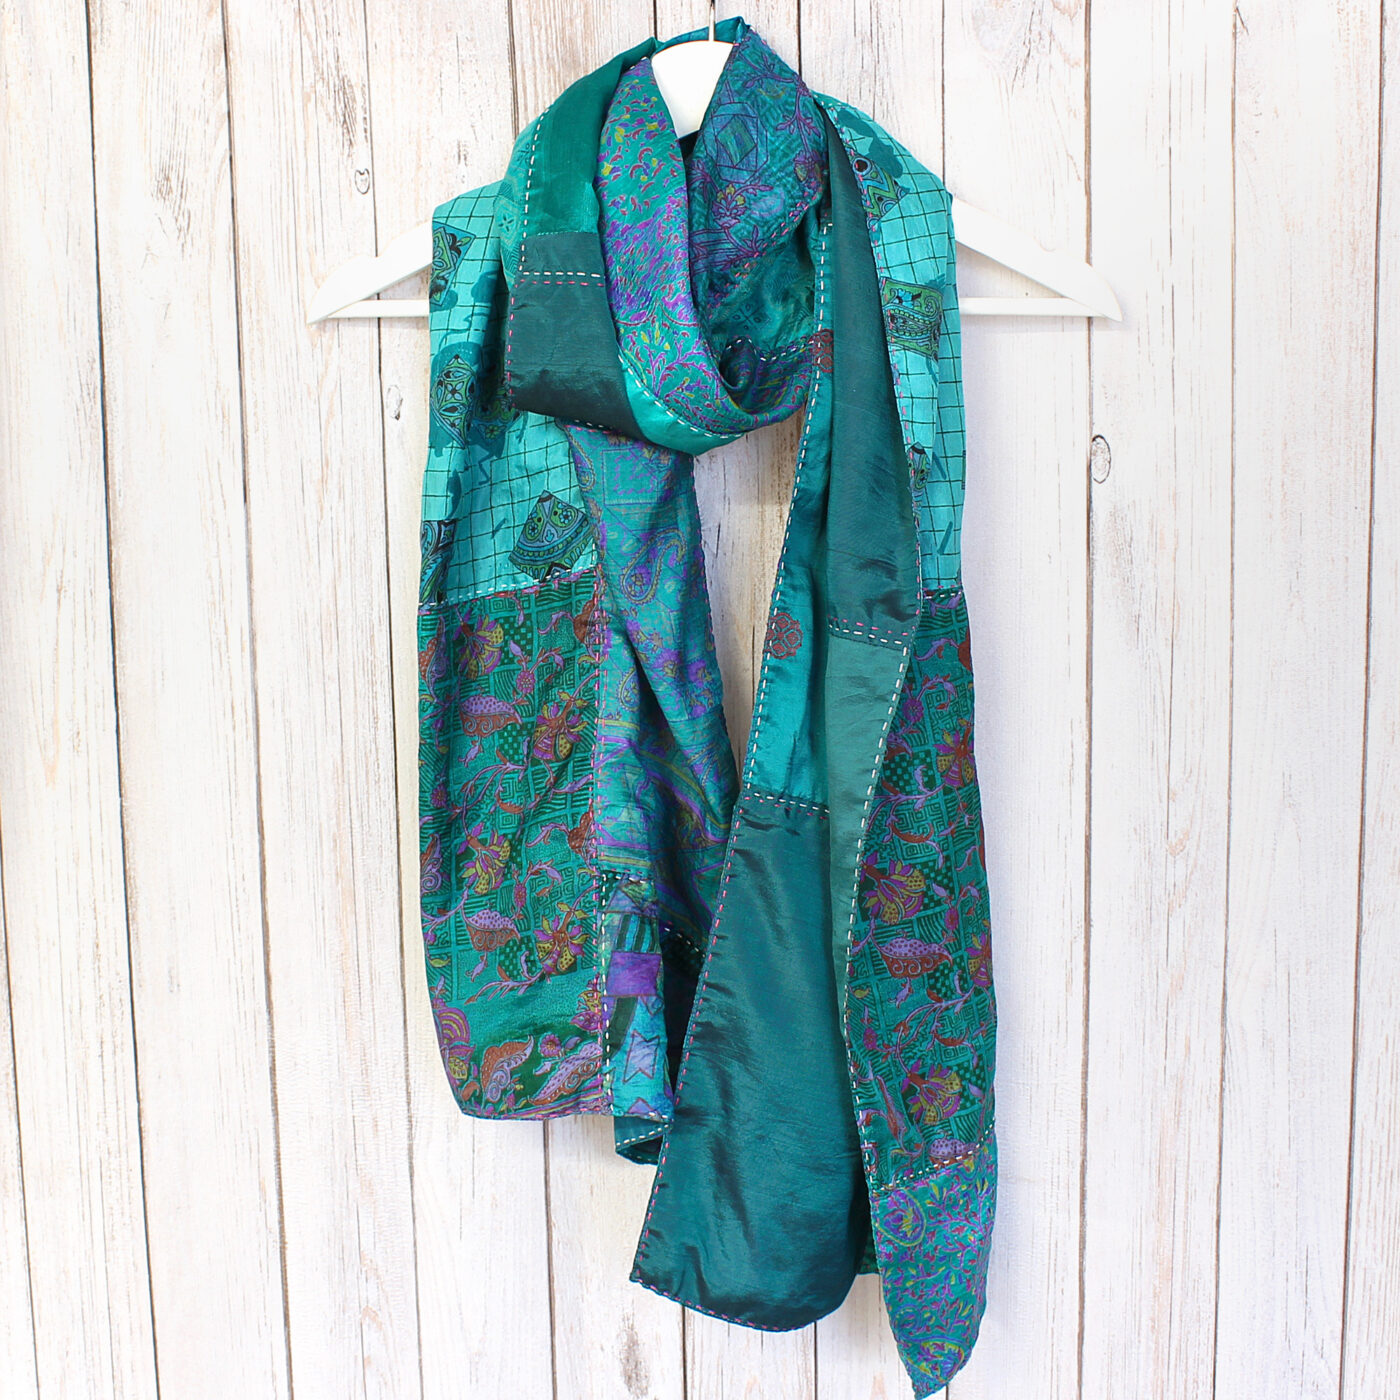 Rich Green Kantha Handstitched Recycled Silk Scarf